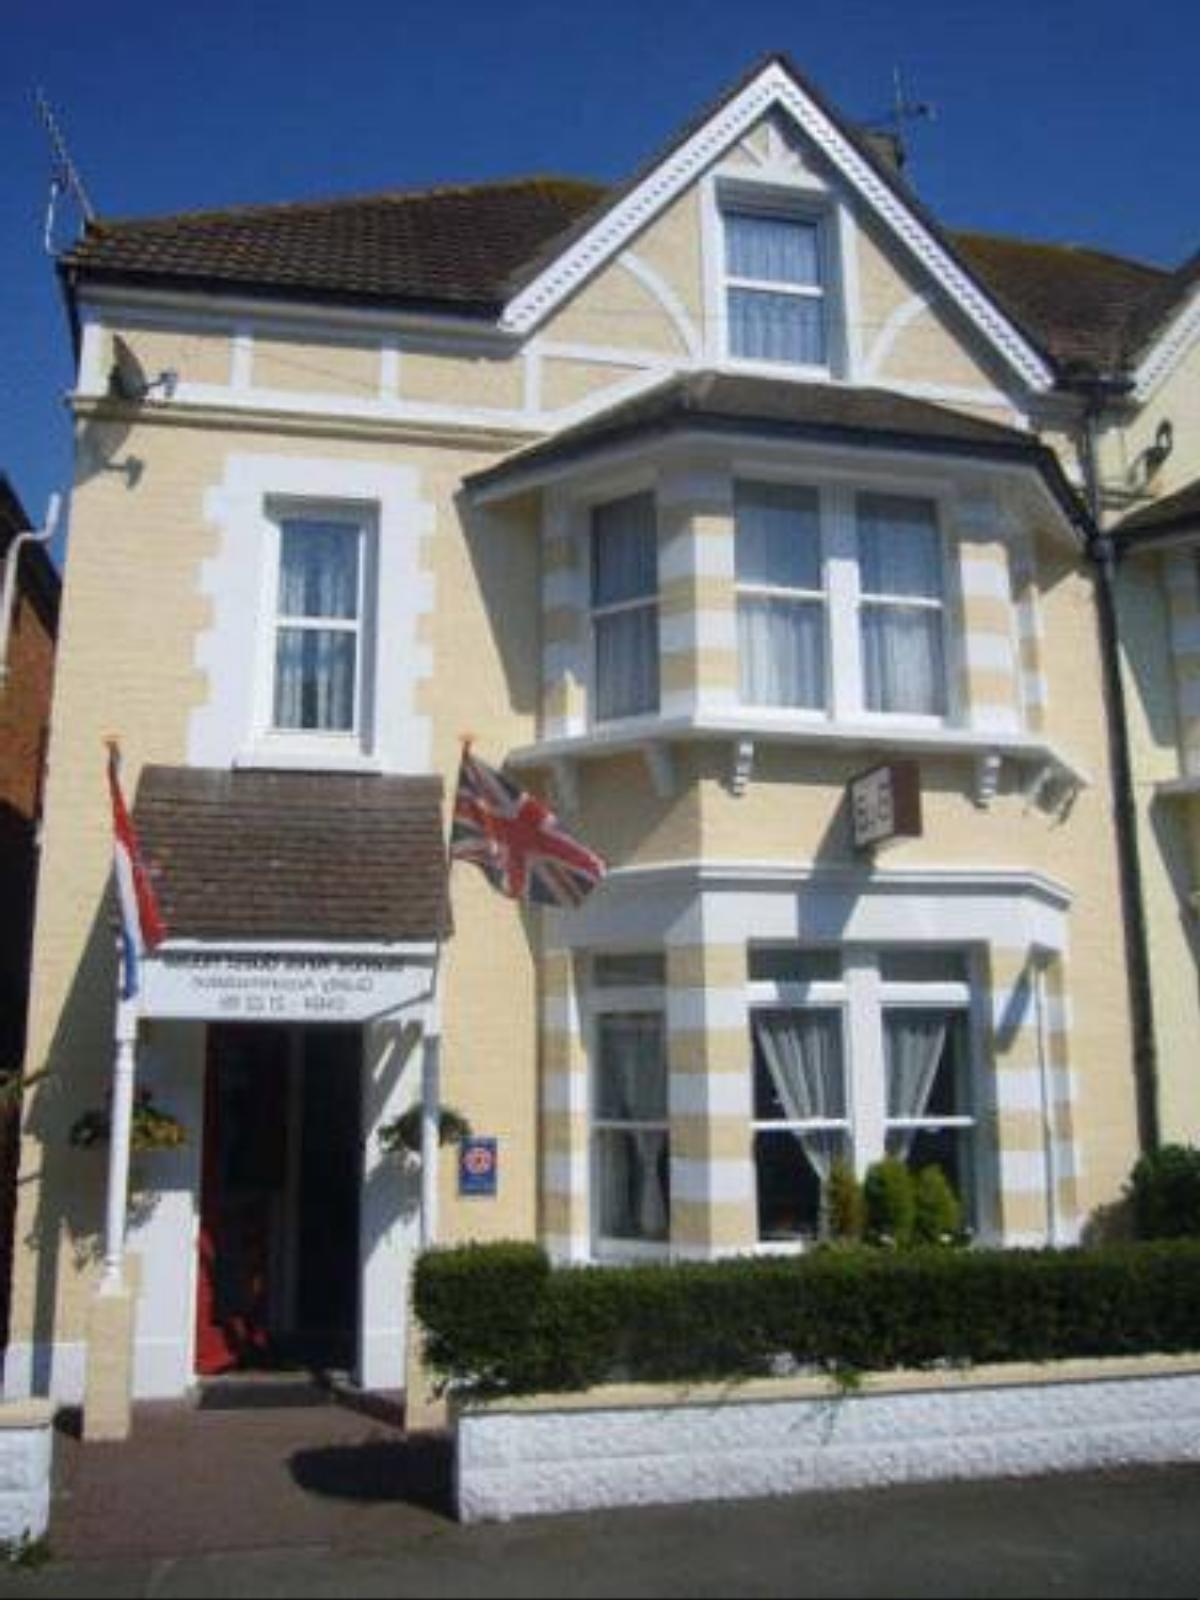 Buenos Aires Guest House Hotel Bexhill United Kingdom